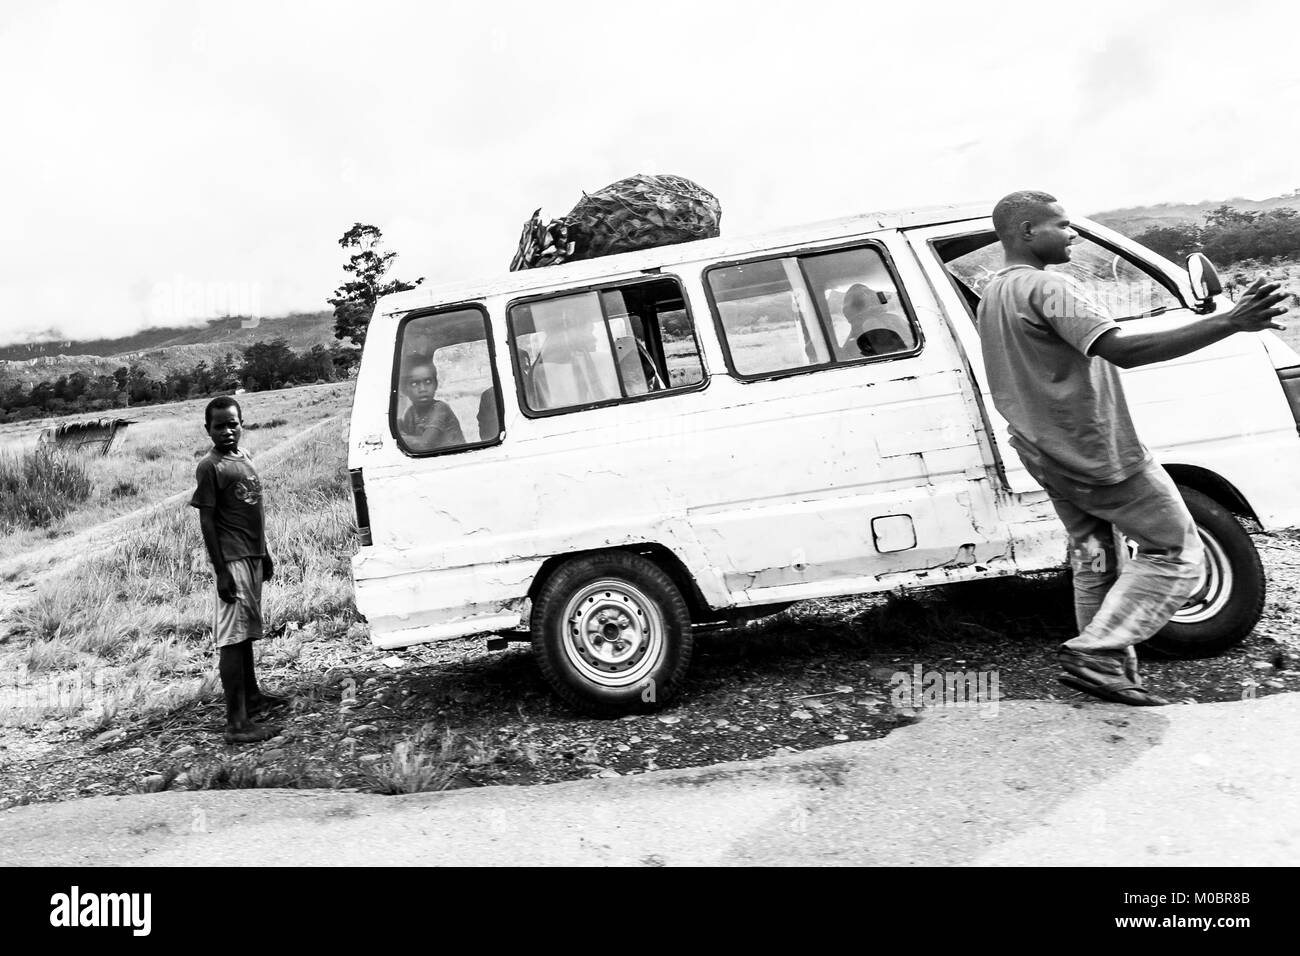 Local Dani people ride the minibus in Baliem Valley, Indonesia. These minibuses hold about 30 people and their luggage. Wamena. Indonesia. Stock Photo